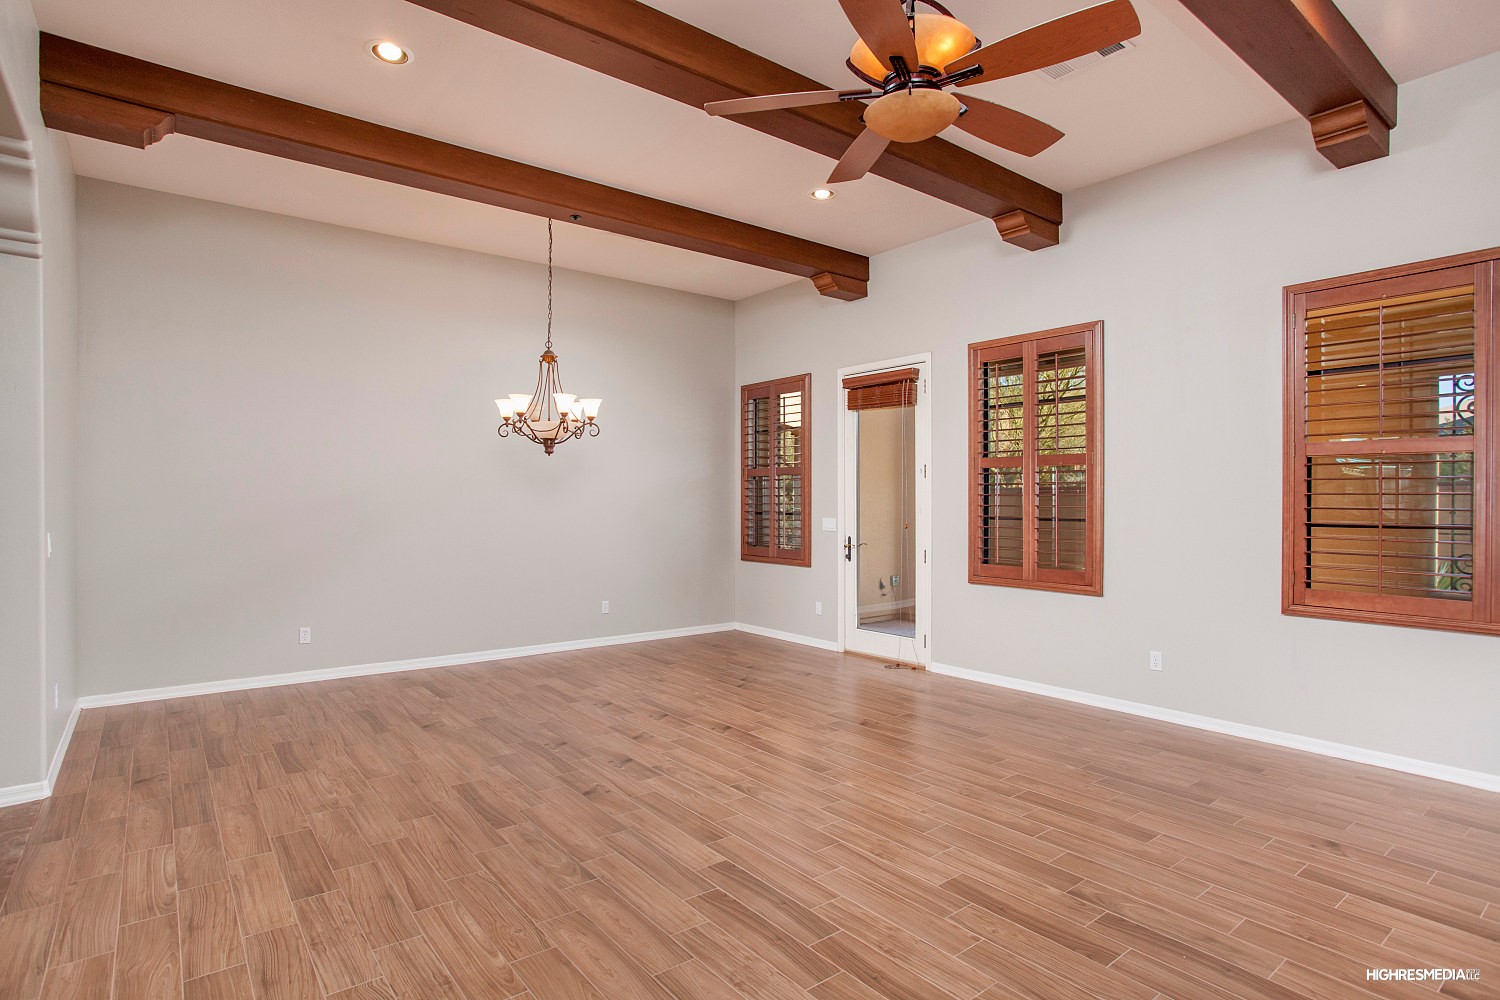 Wood-beamed ceilings at this Scottsdale townhome for sale in Market Street at DC Ranch located at 20704 N 90th Pl #1005 Scottsdale, AZ 85255 listed by Don Matheson at The Matheson Team